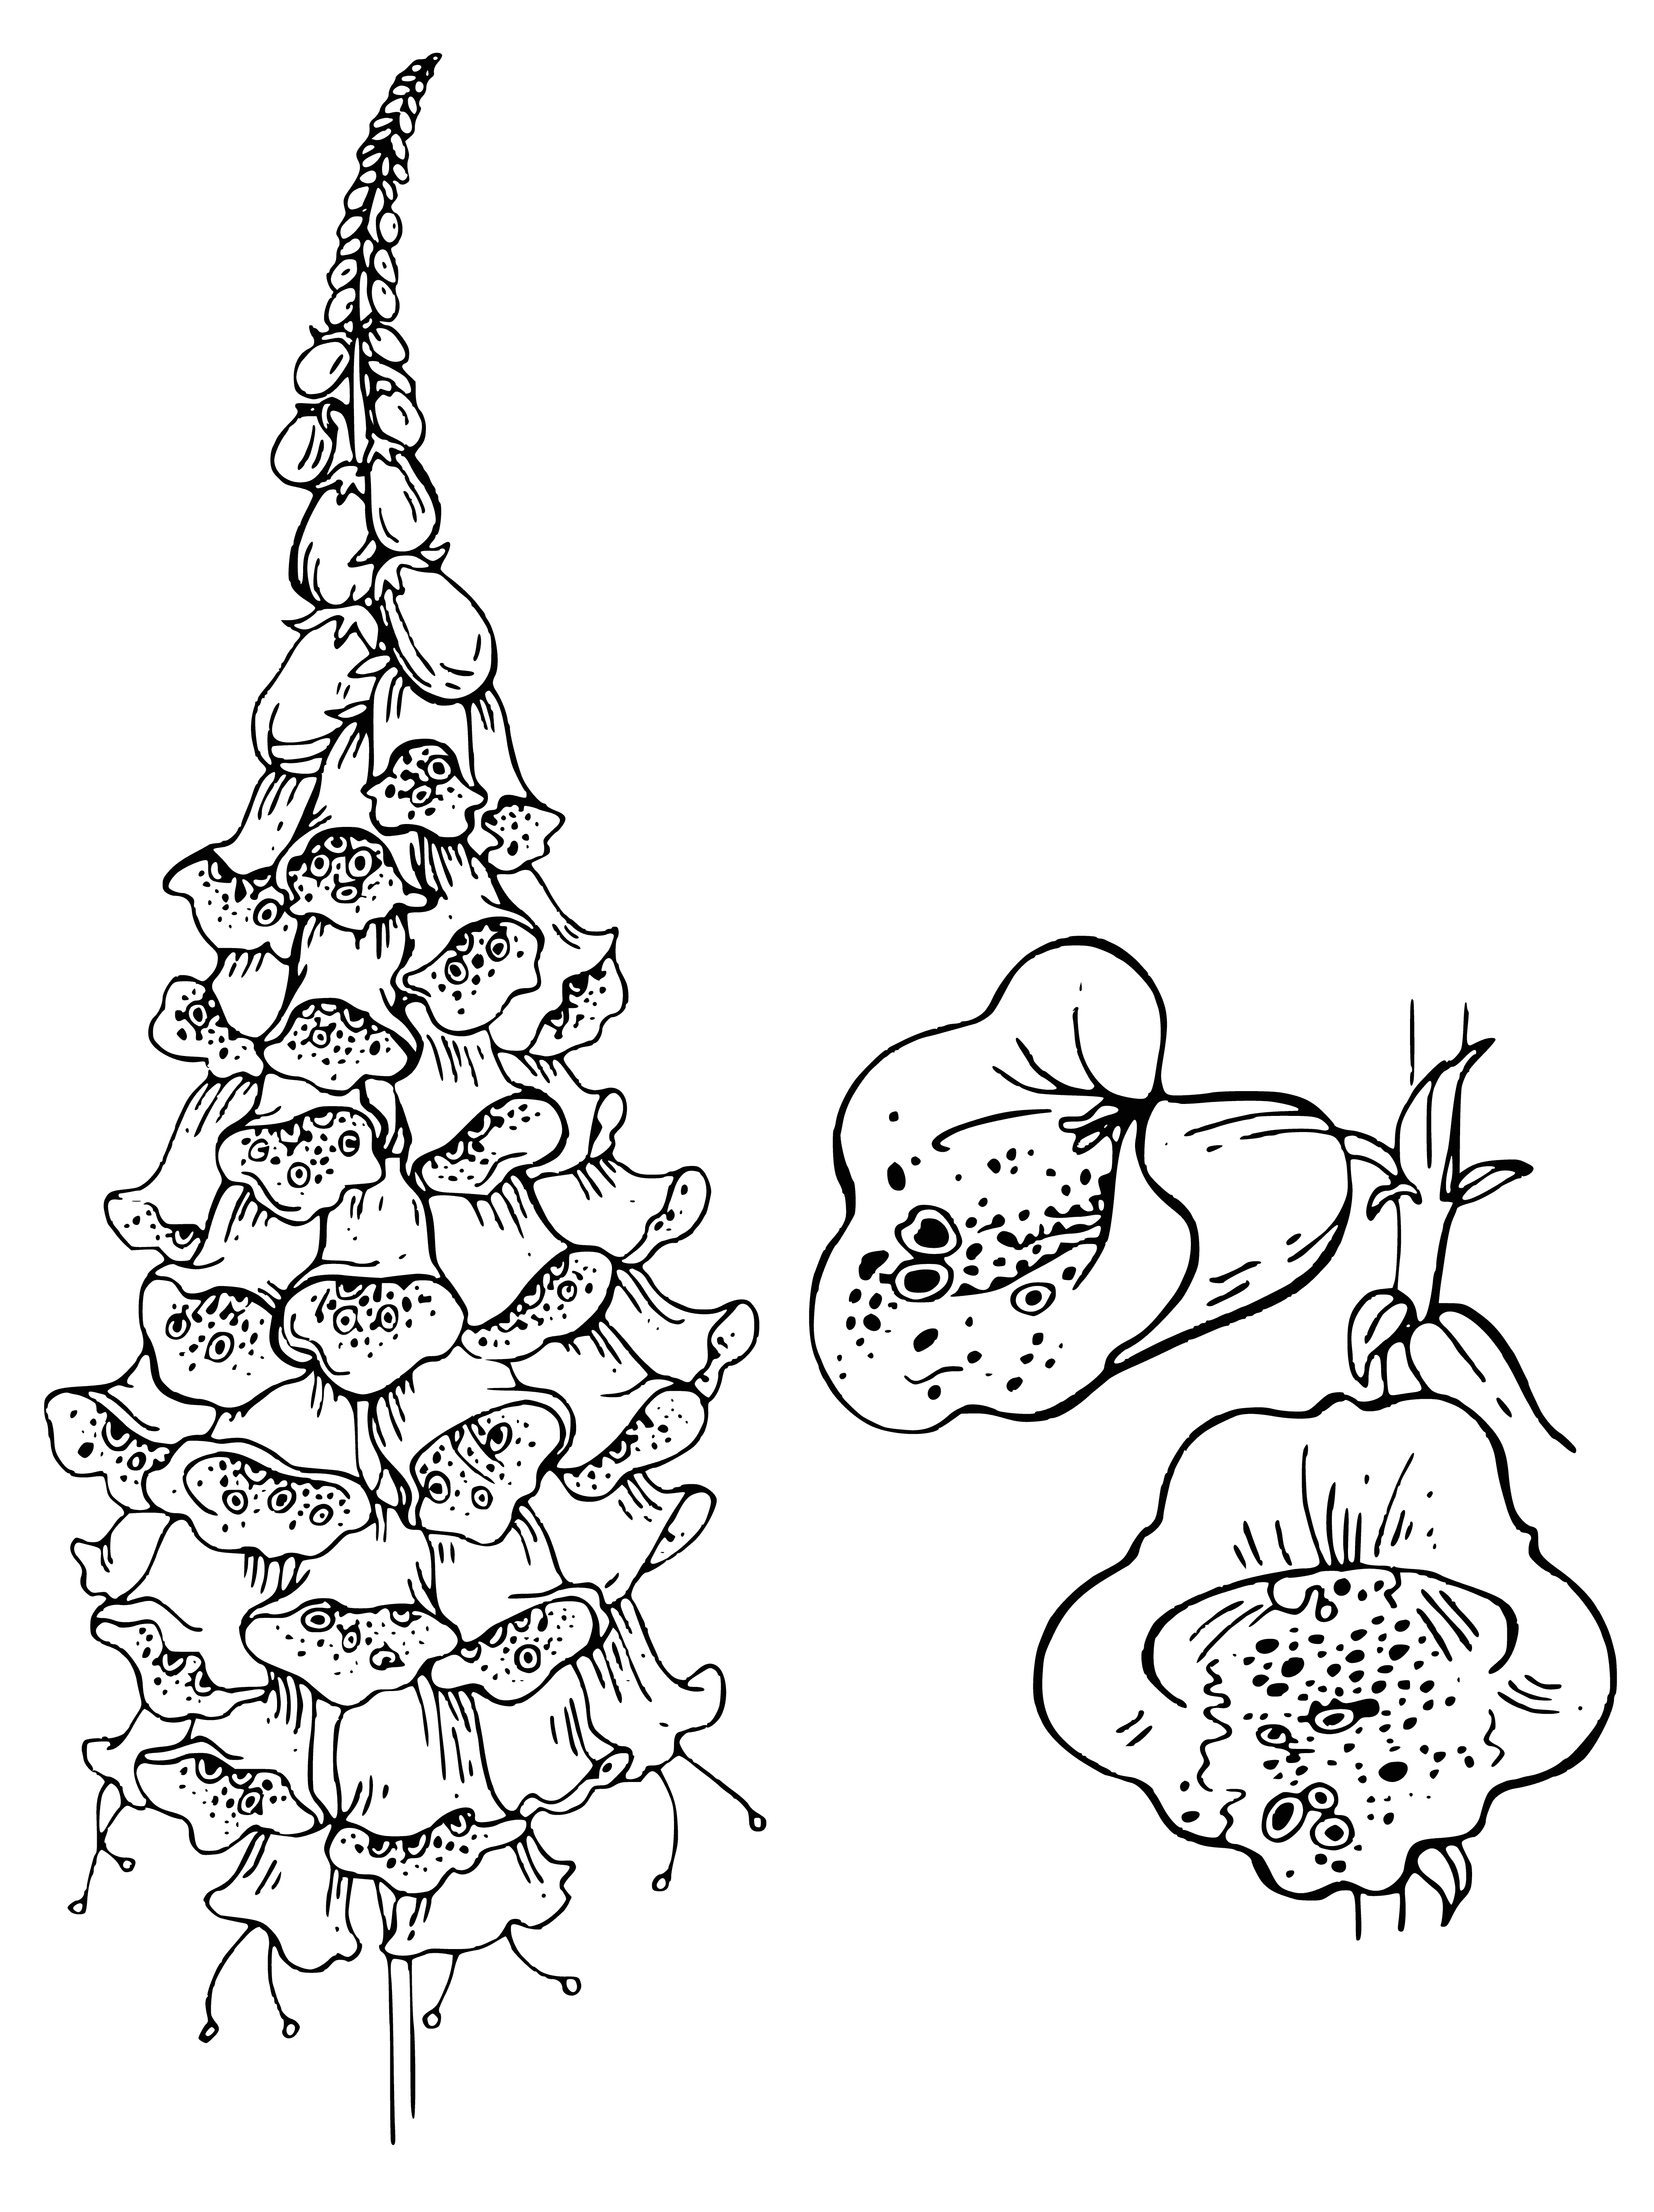 Foxglove coloring page